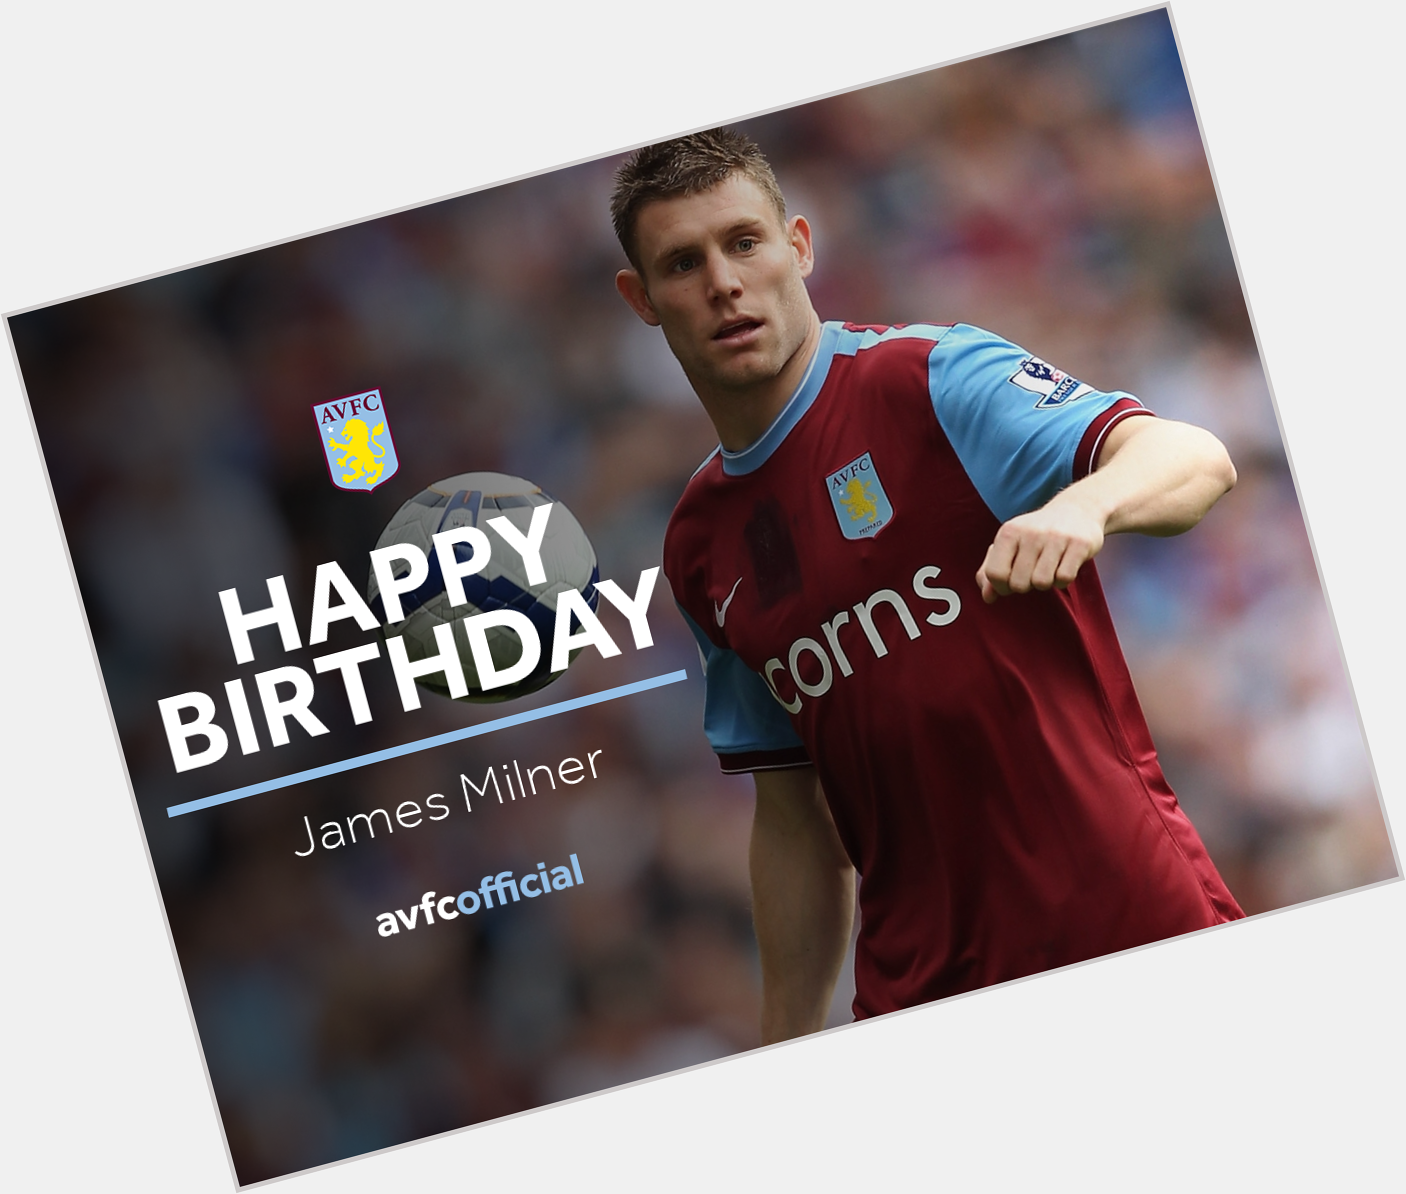   Happy 30th Birthday to former Villan, James Milner!

Have a great day James! 